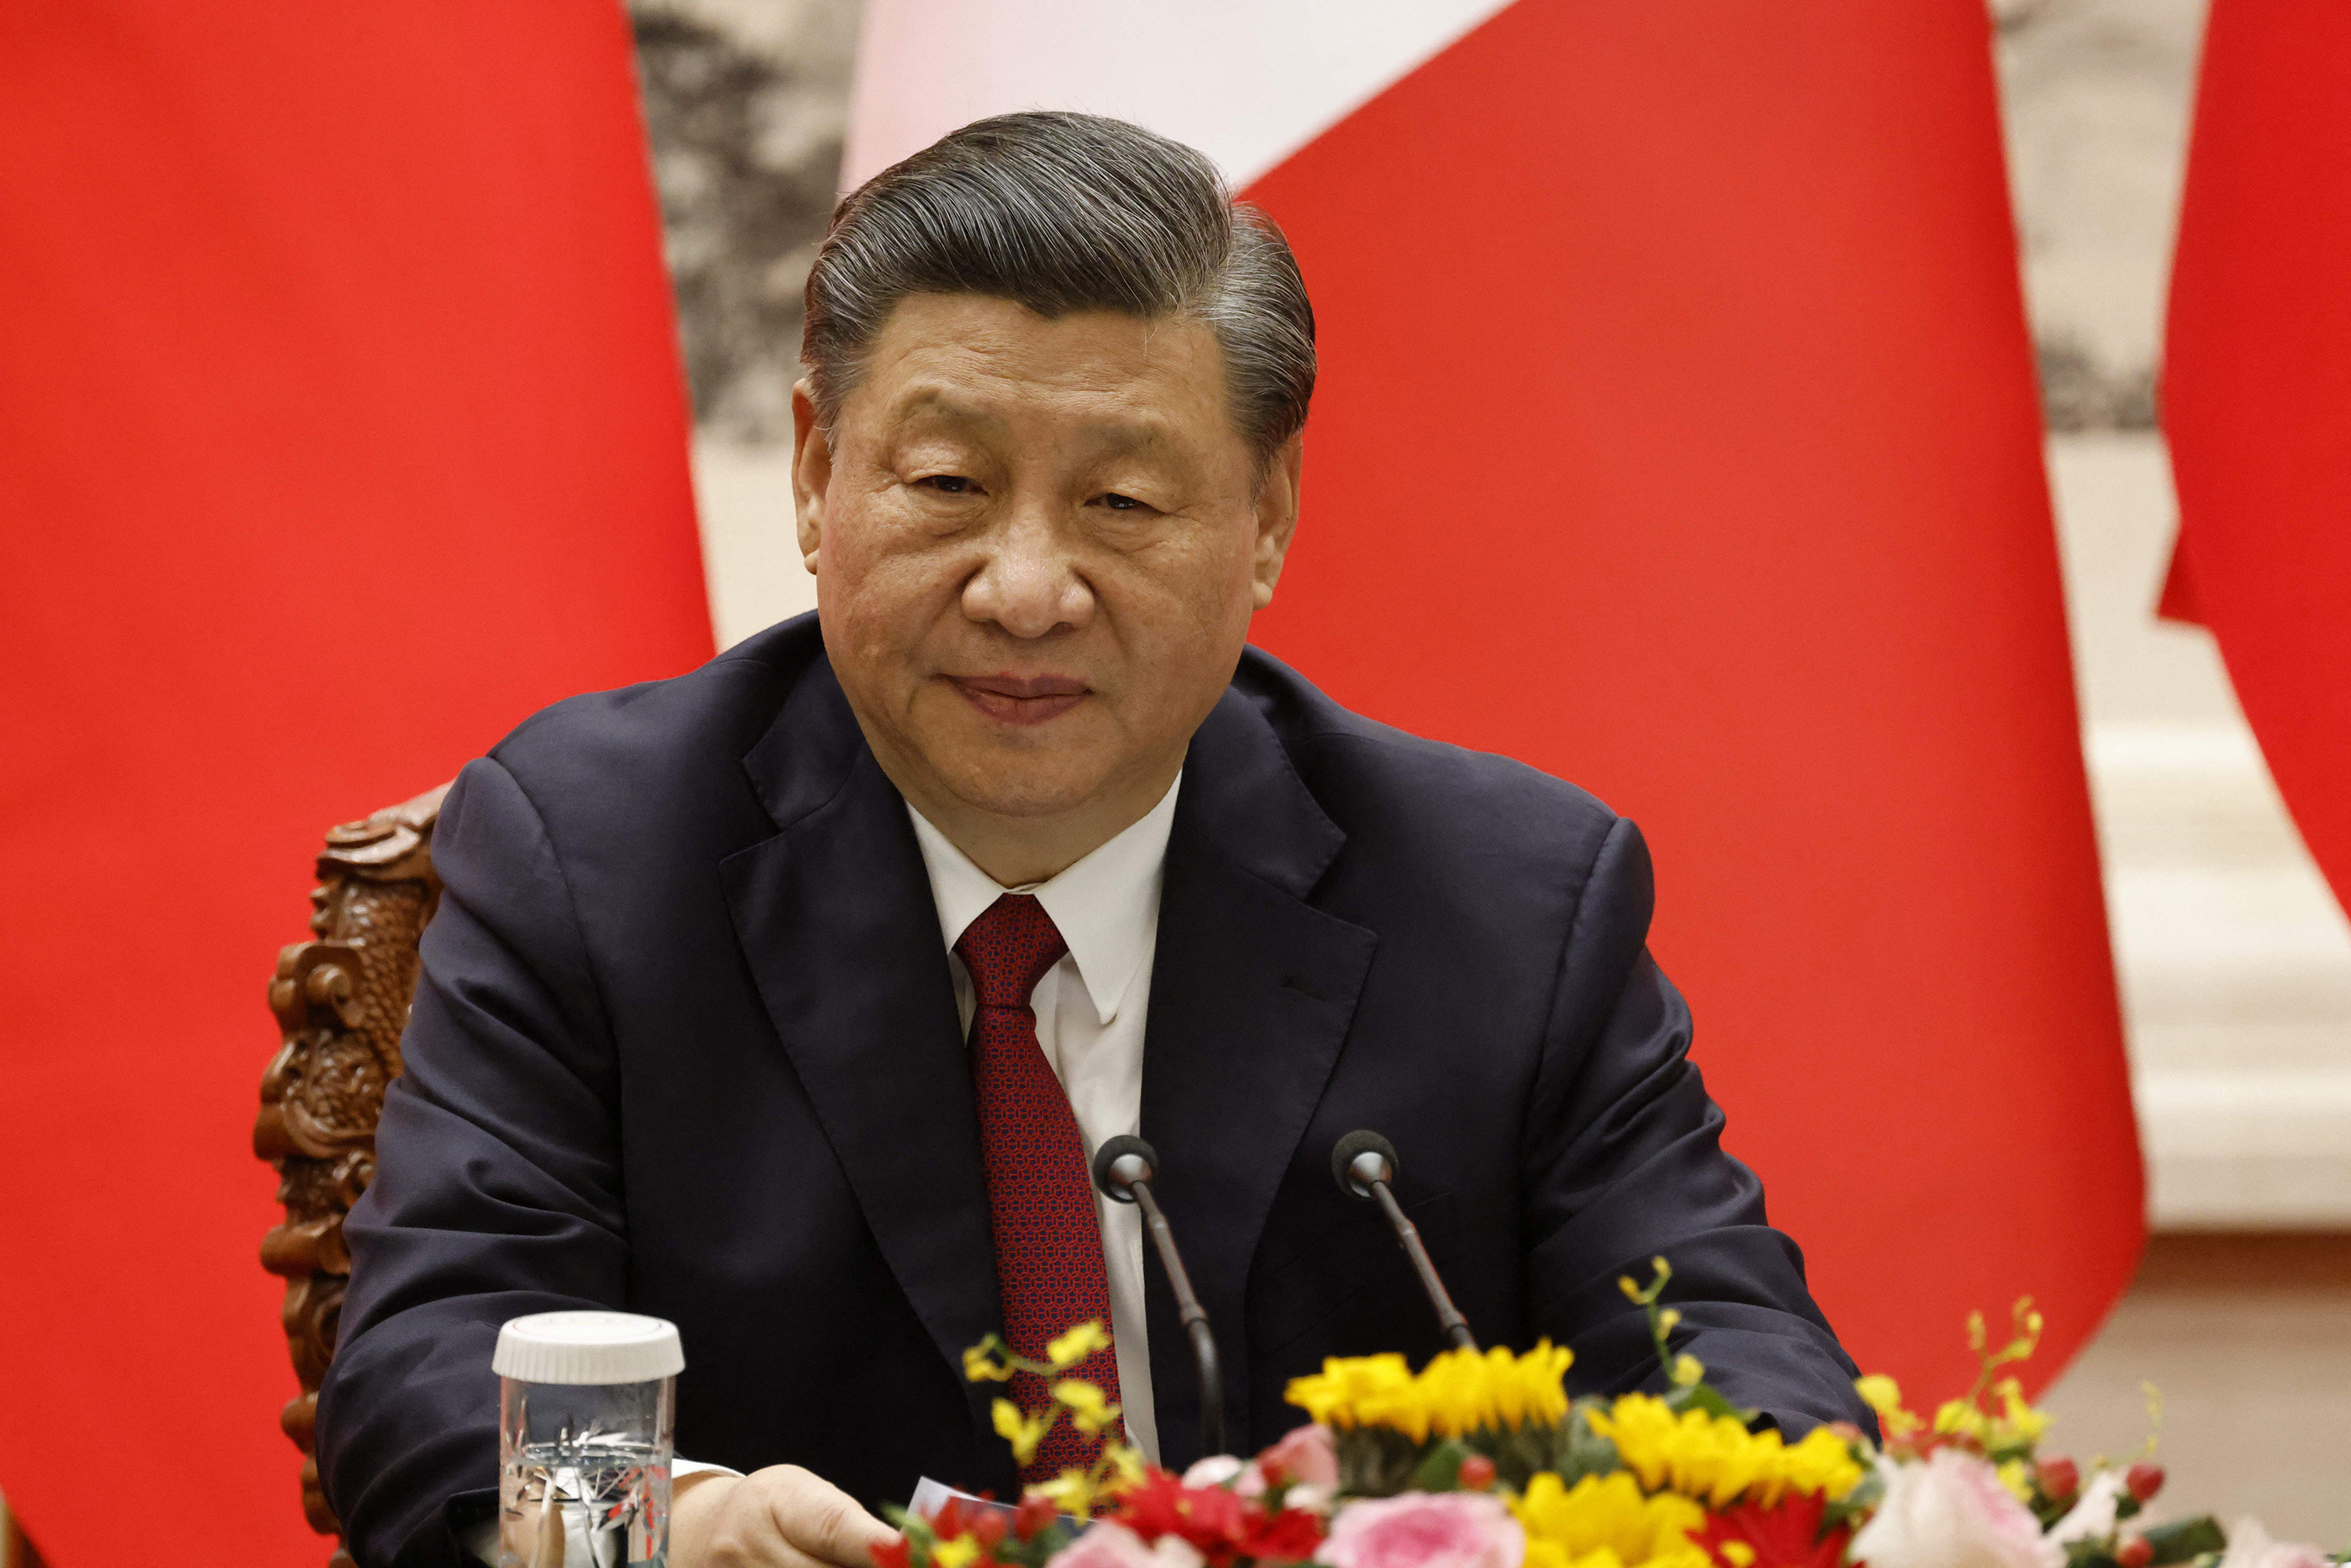 The report cited President Xi Jinping’s assertion that “religions in China must be Chinese in orientation” as an indication of what the State Department called a “campaign against religious groups”. Photo: AFP/Getty Images/TNS